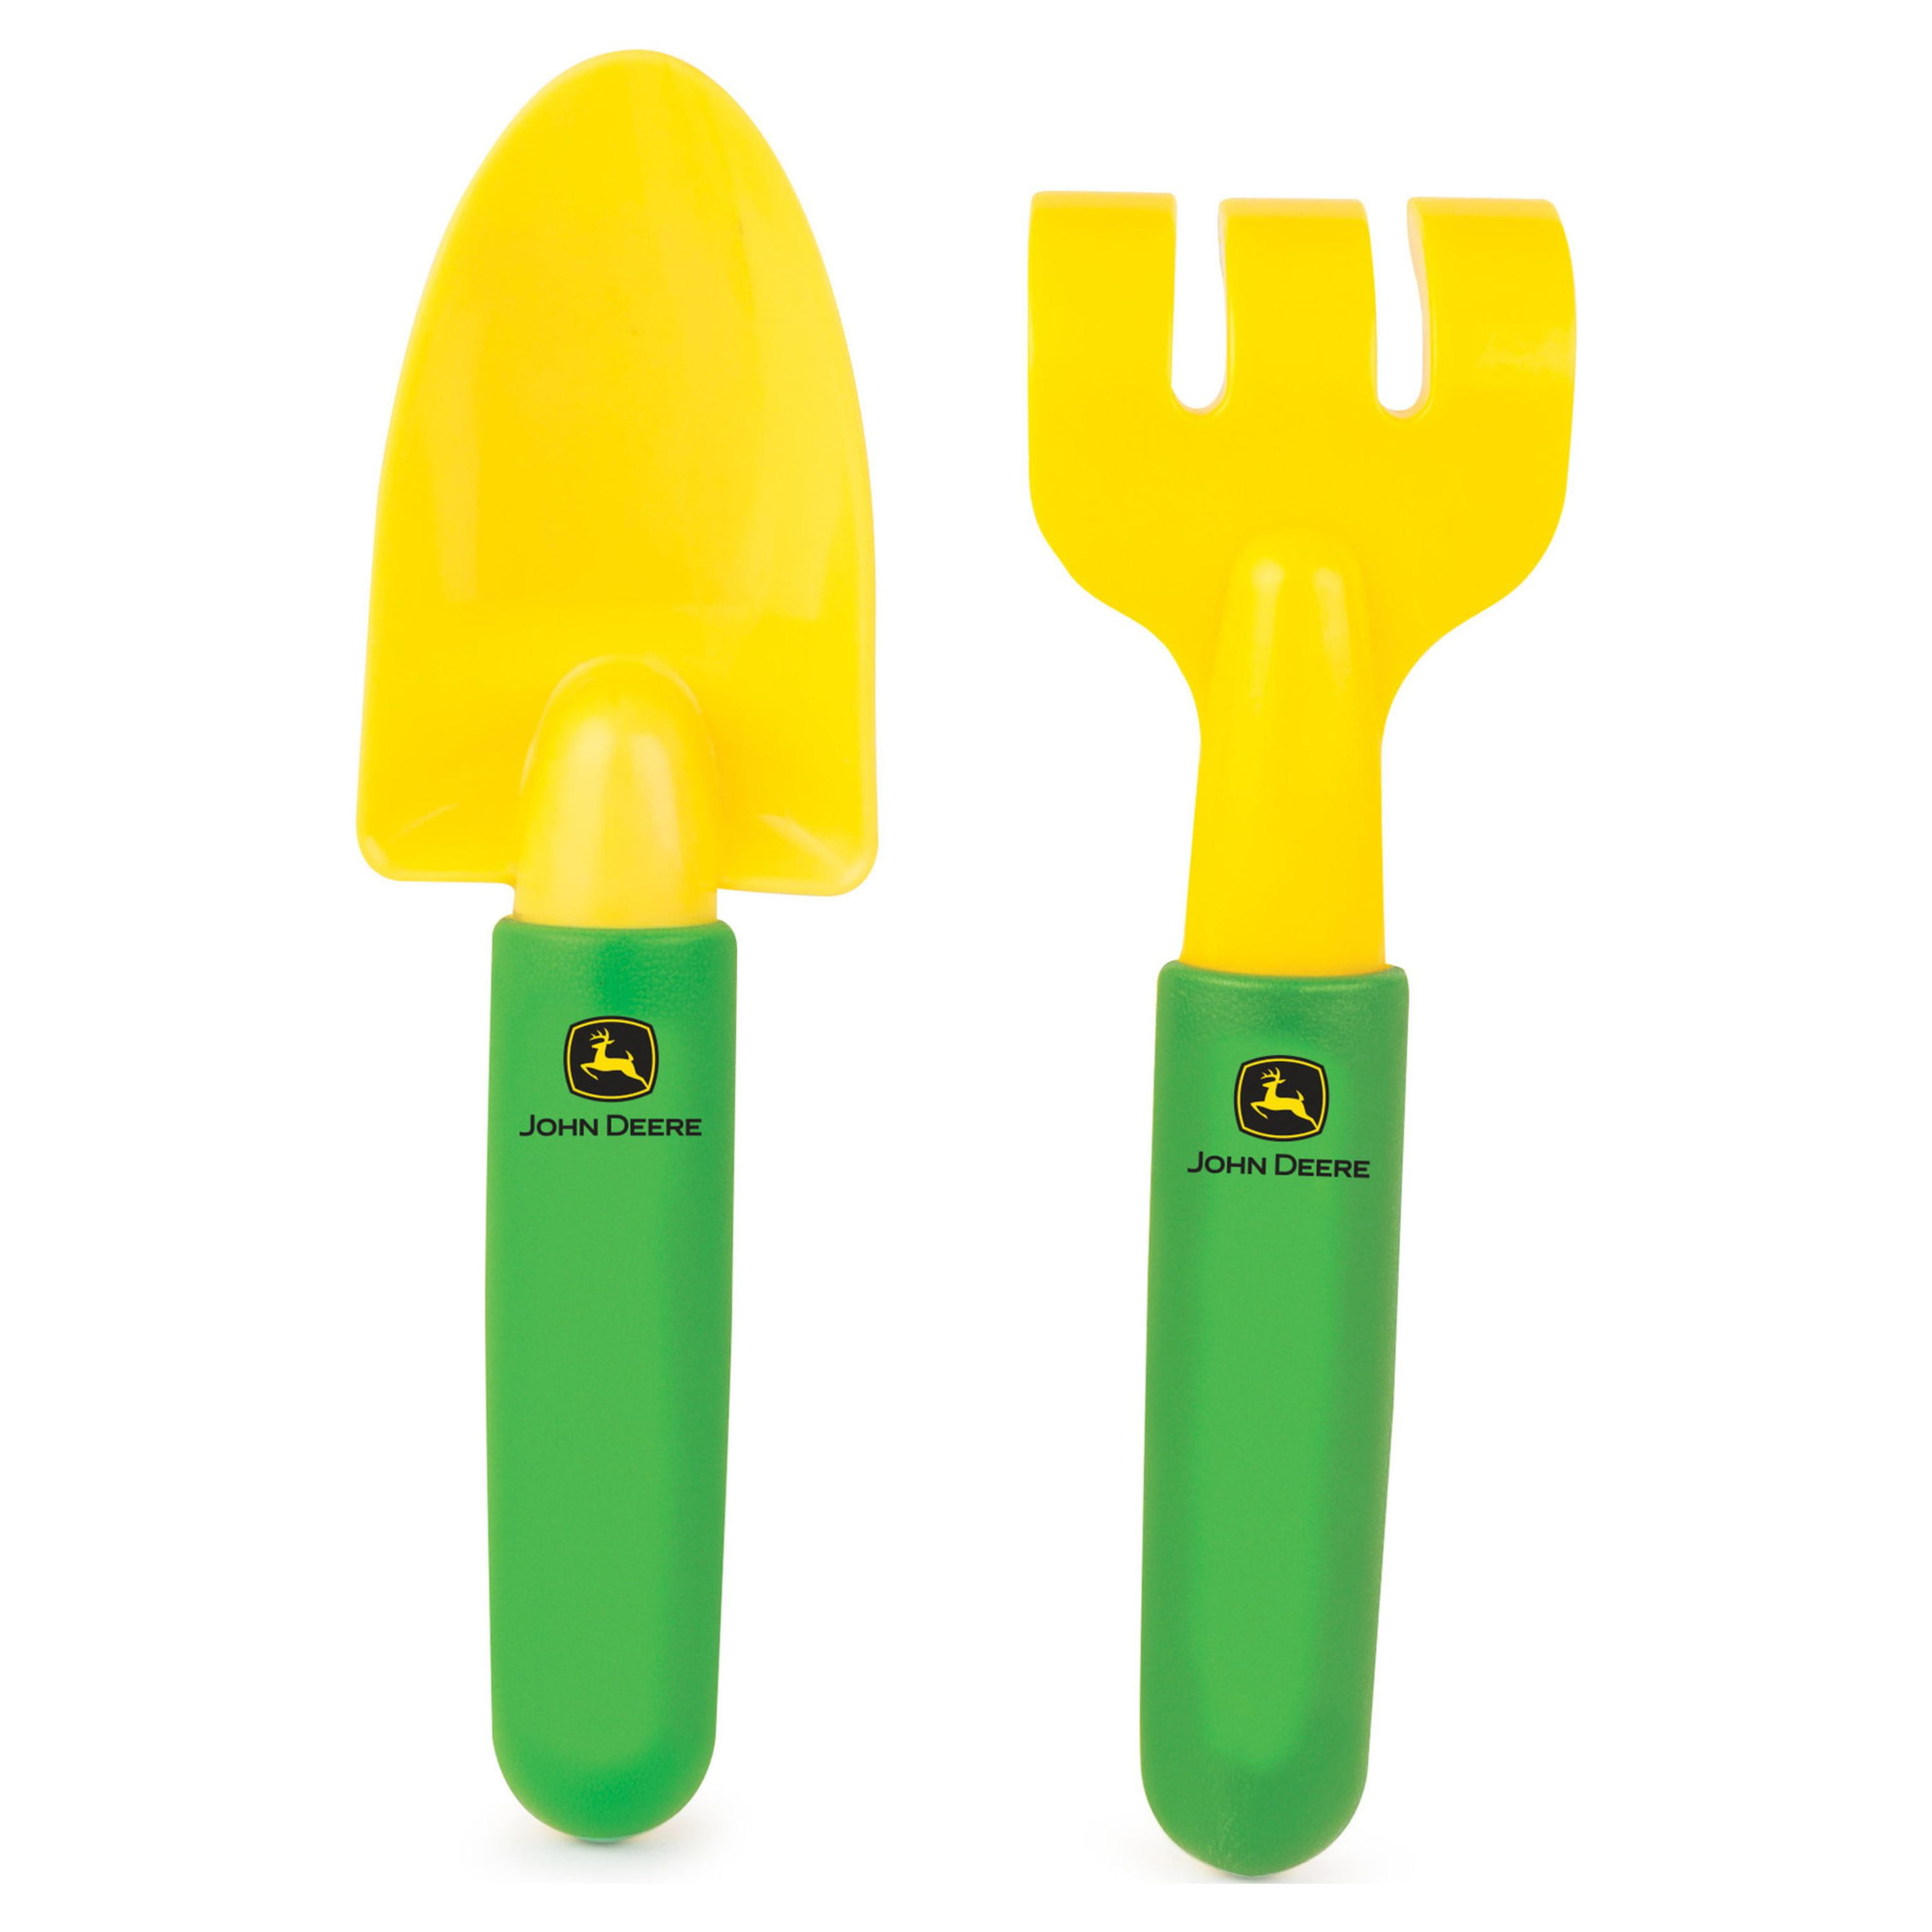 John Deere Lawn and Garden Role Play Set, Includes Weed Trimmer, Trowel and  Mini Hand Rake 